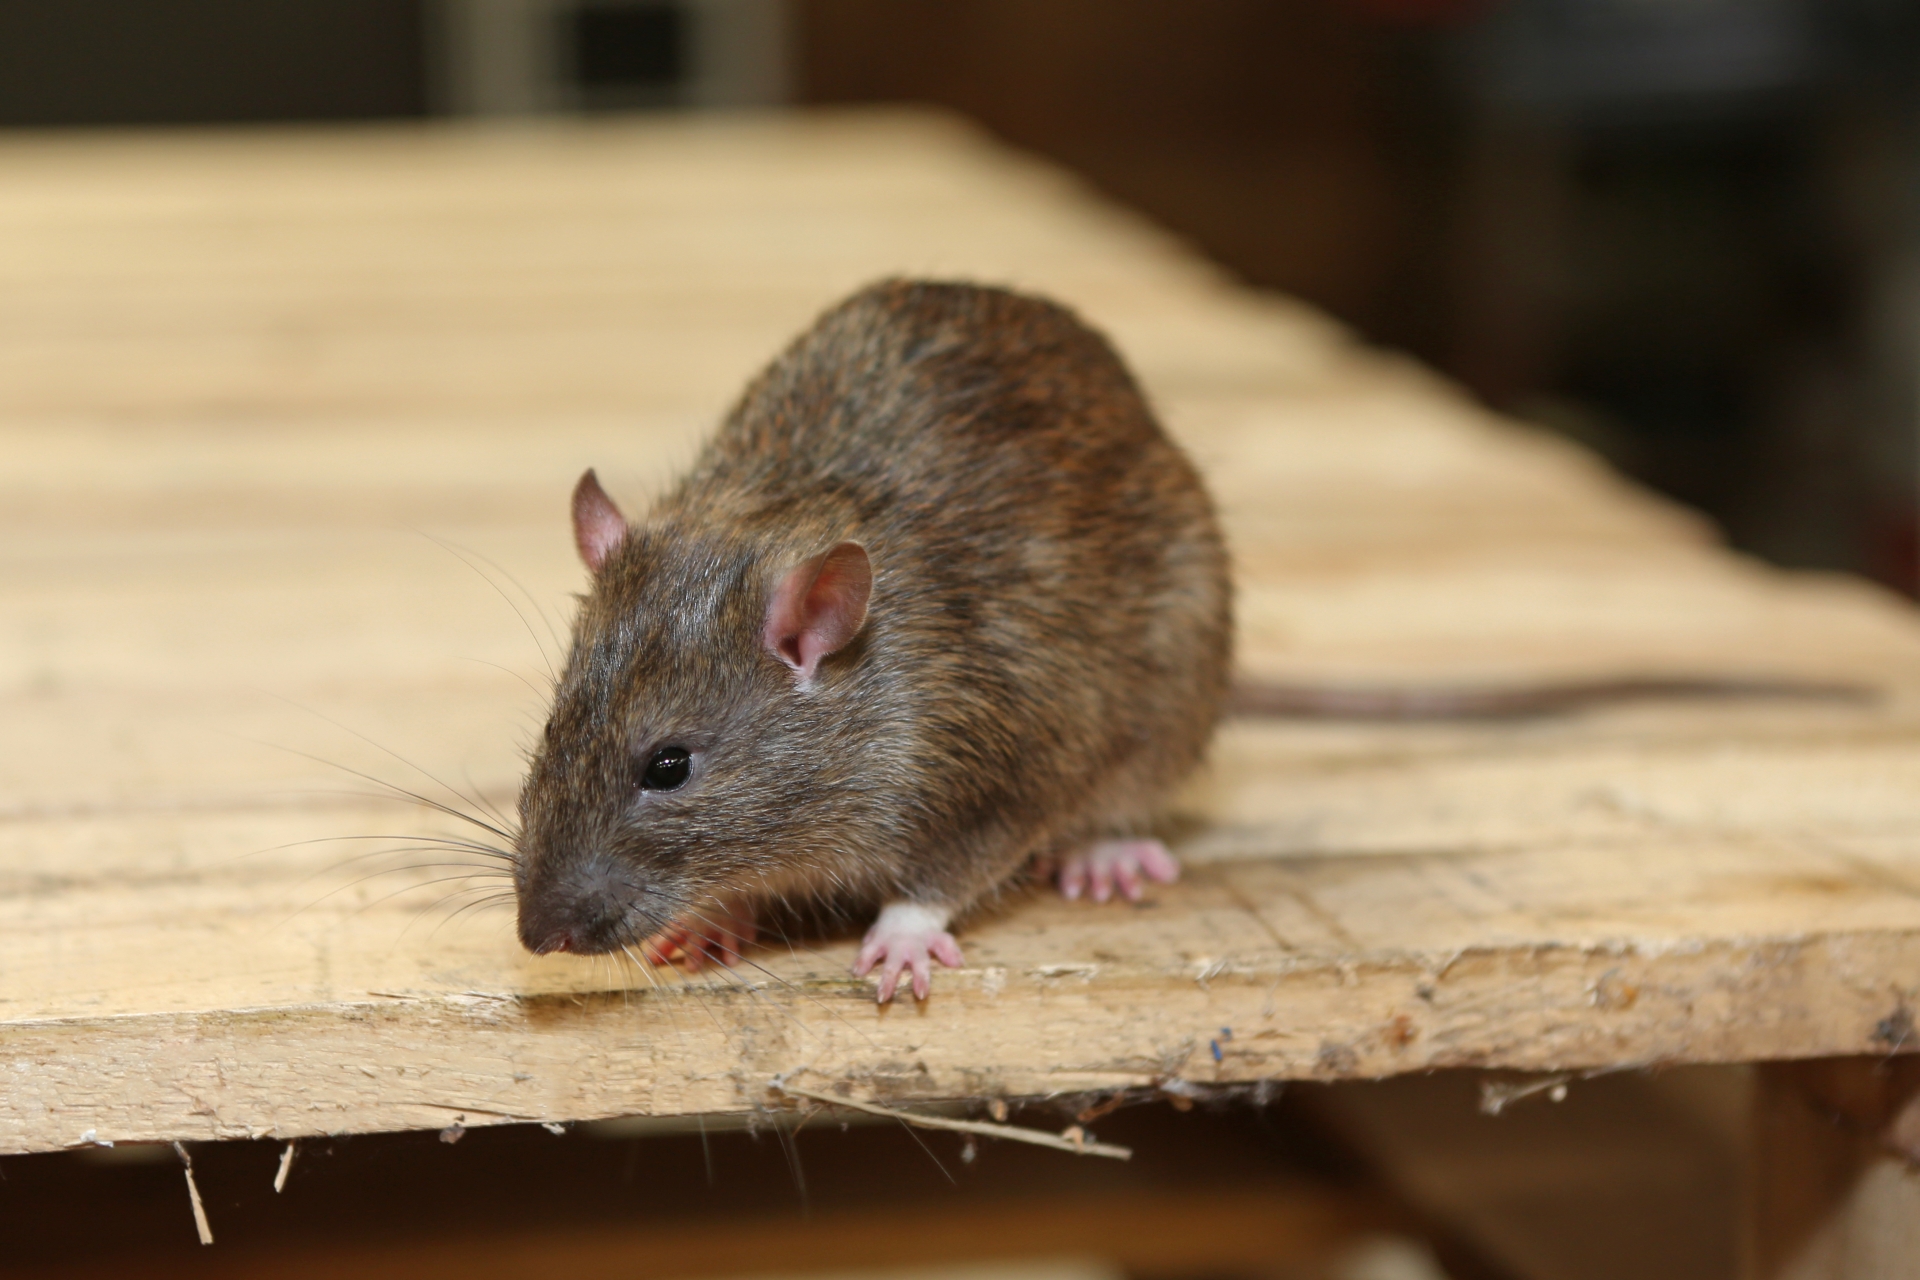 Rat Infestation, Pest Control in Coulsdon, Old Coulsdon, Chipstead, CR5. Call Now 020 8166 9746